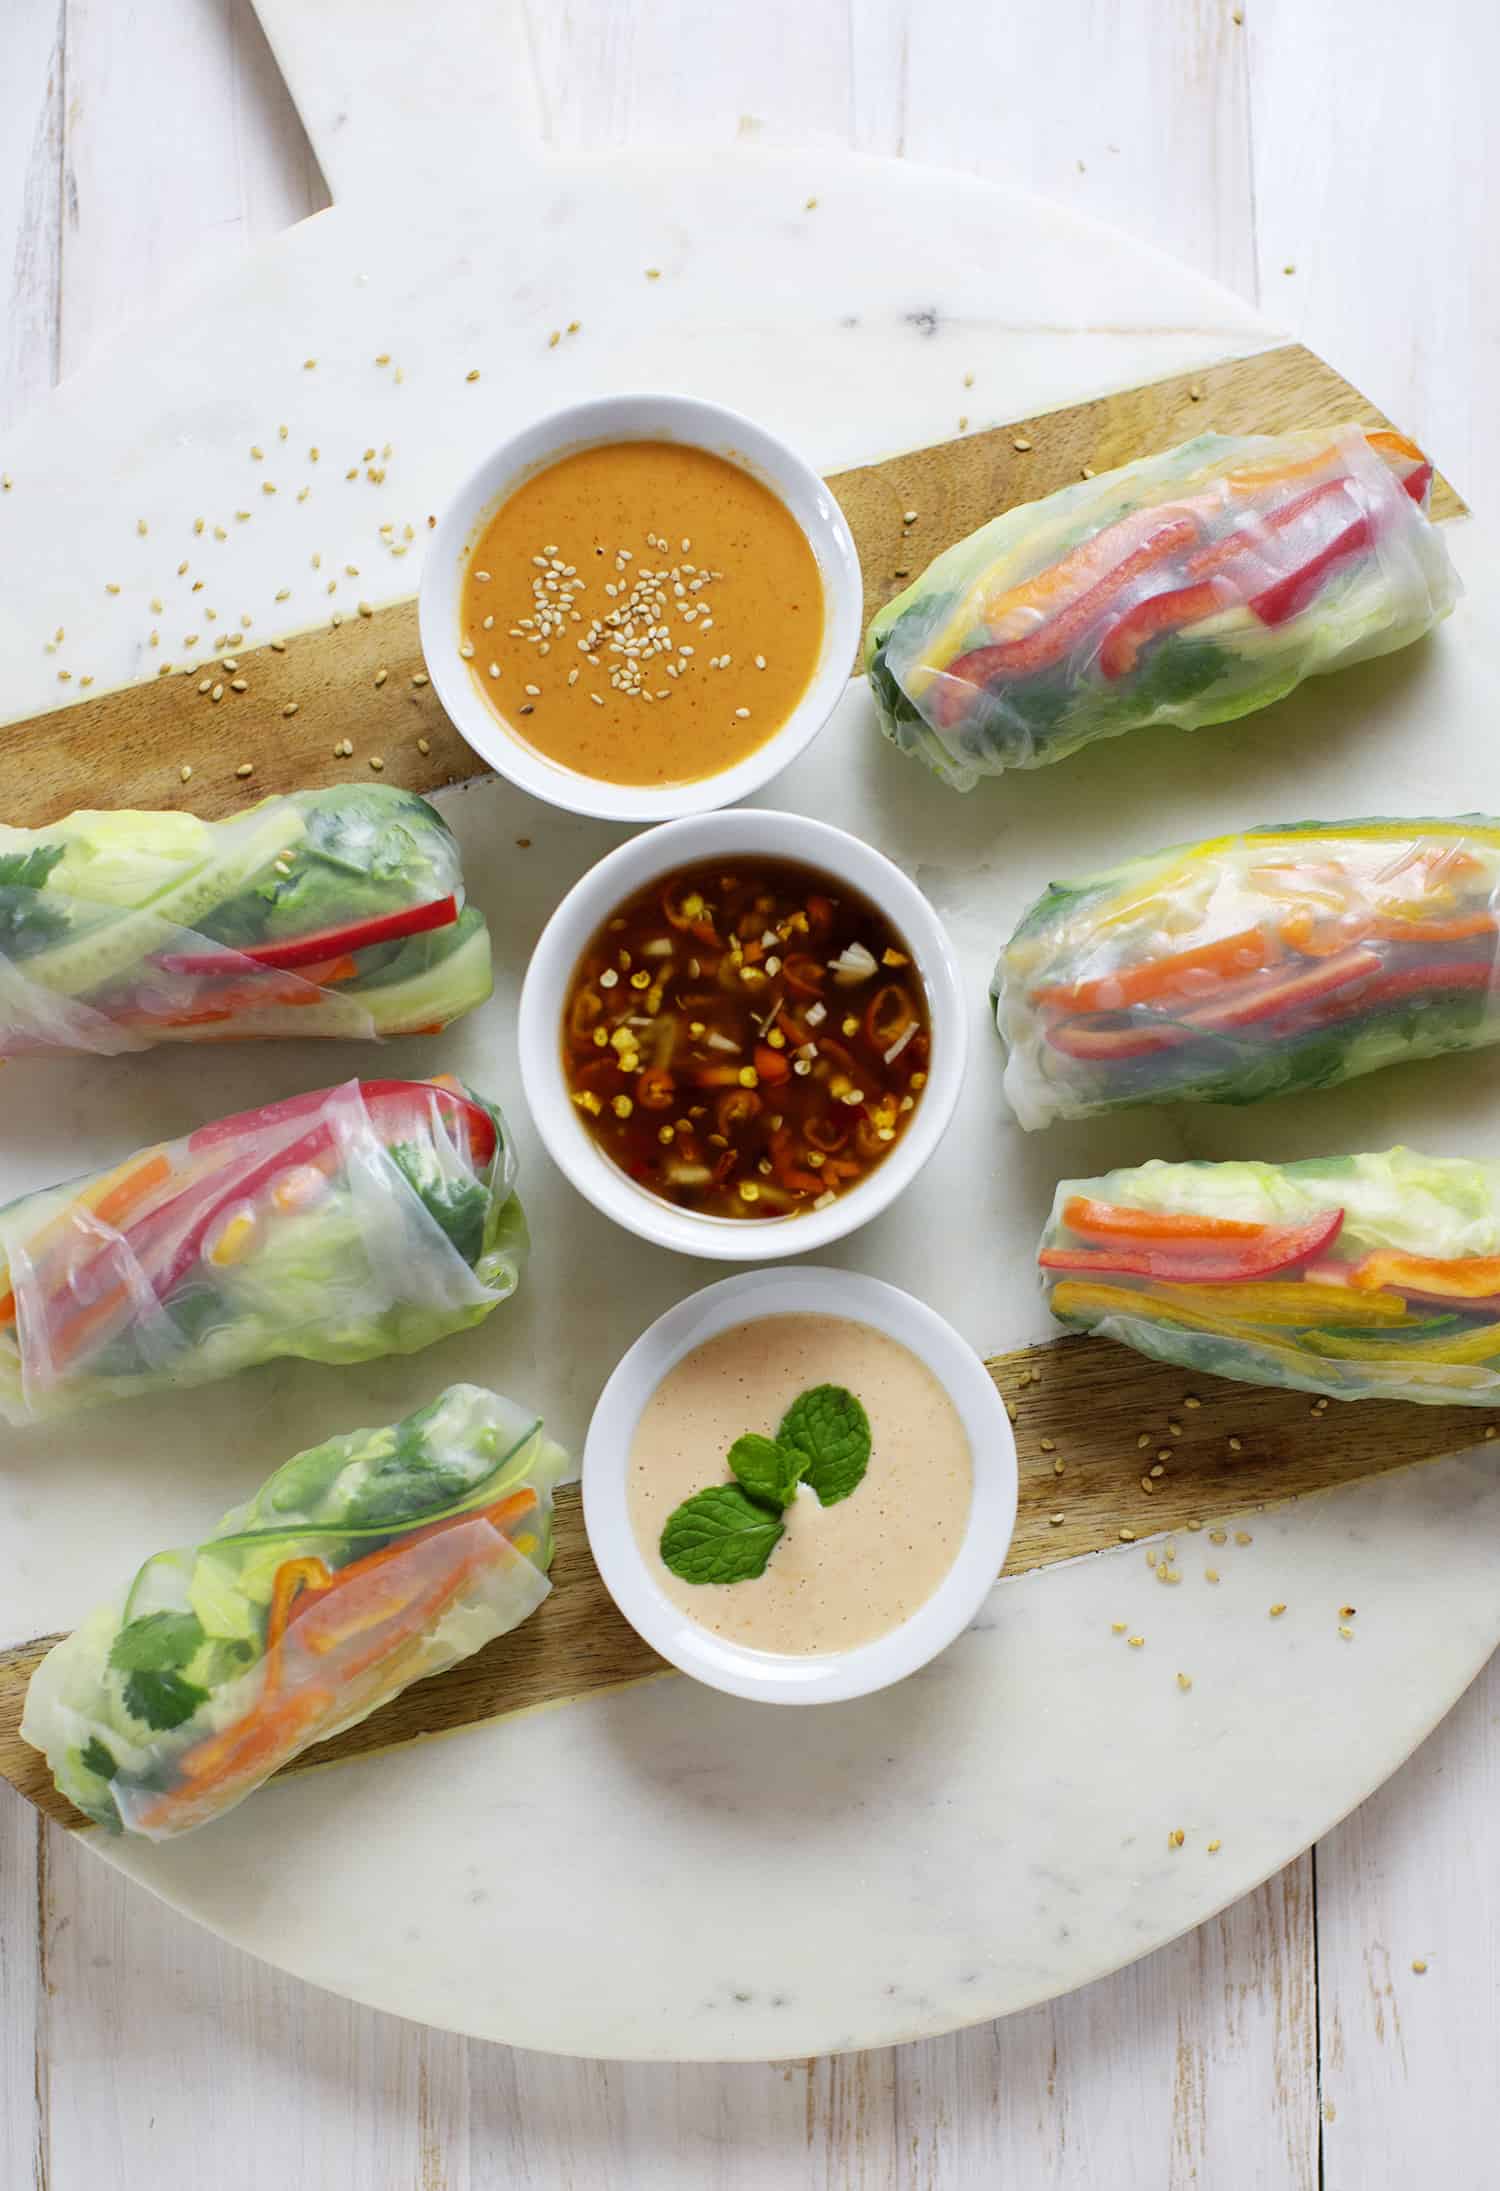 roll up your prepped veggies in the spring roll wrappers with different sauces